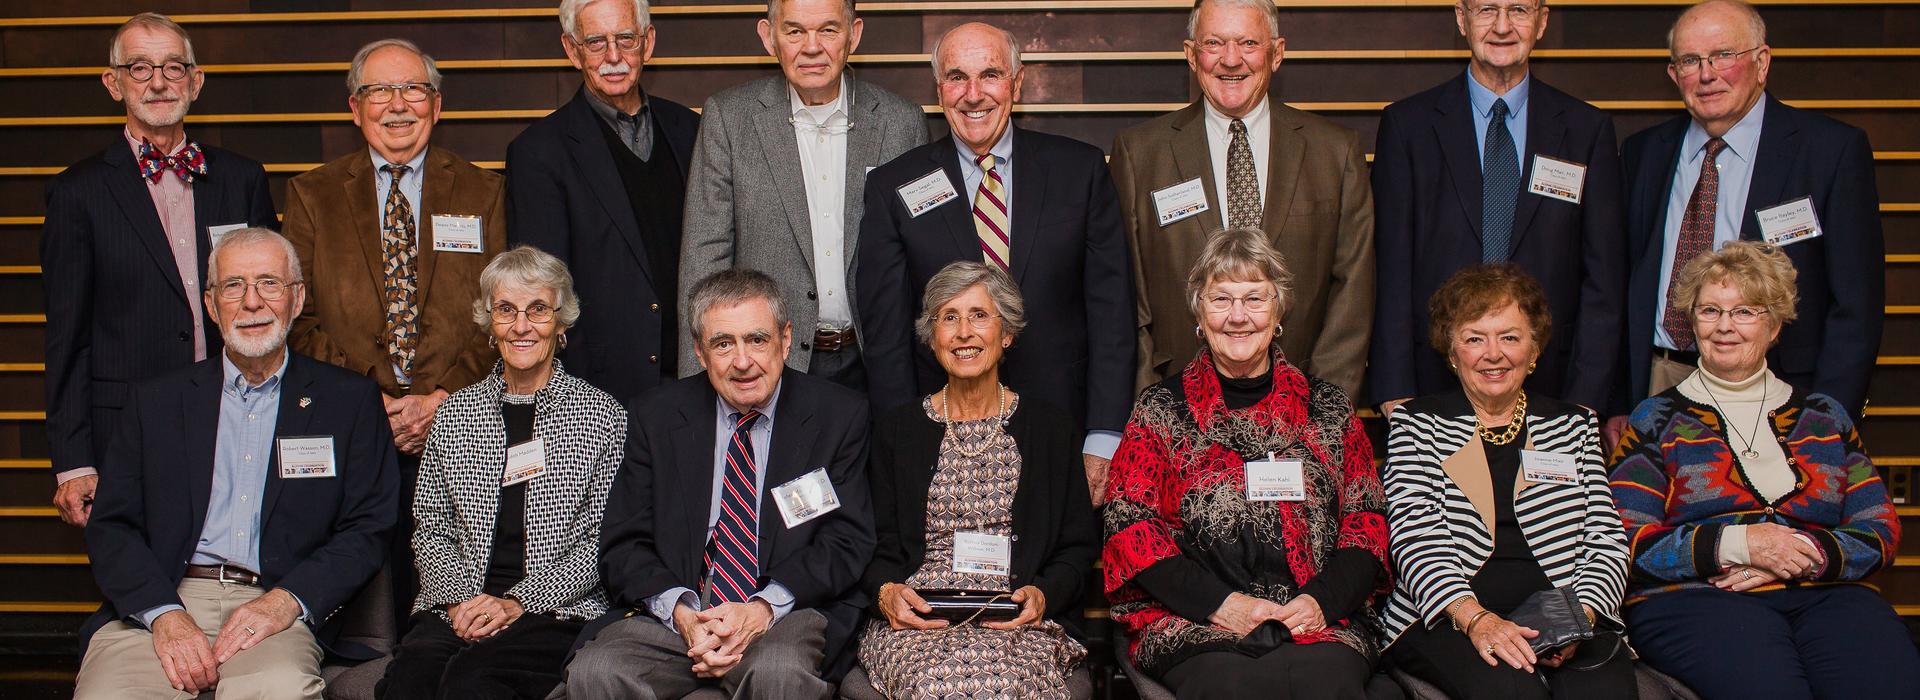 Class of 1962 at 55th reunion